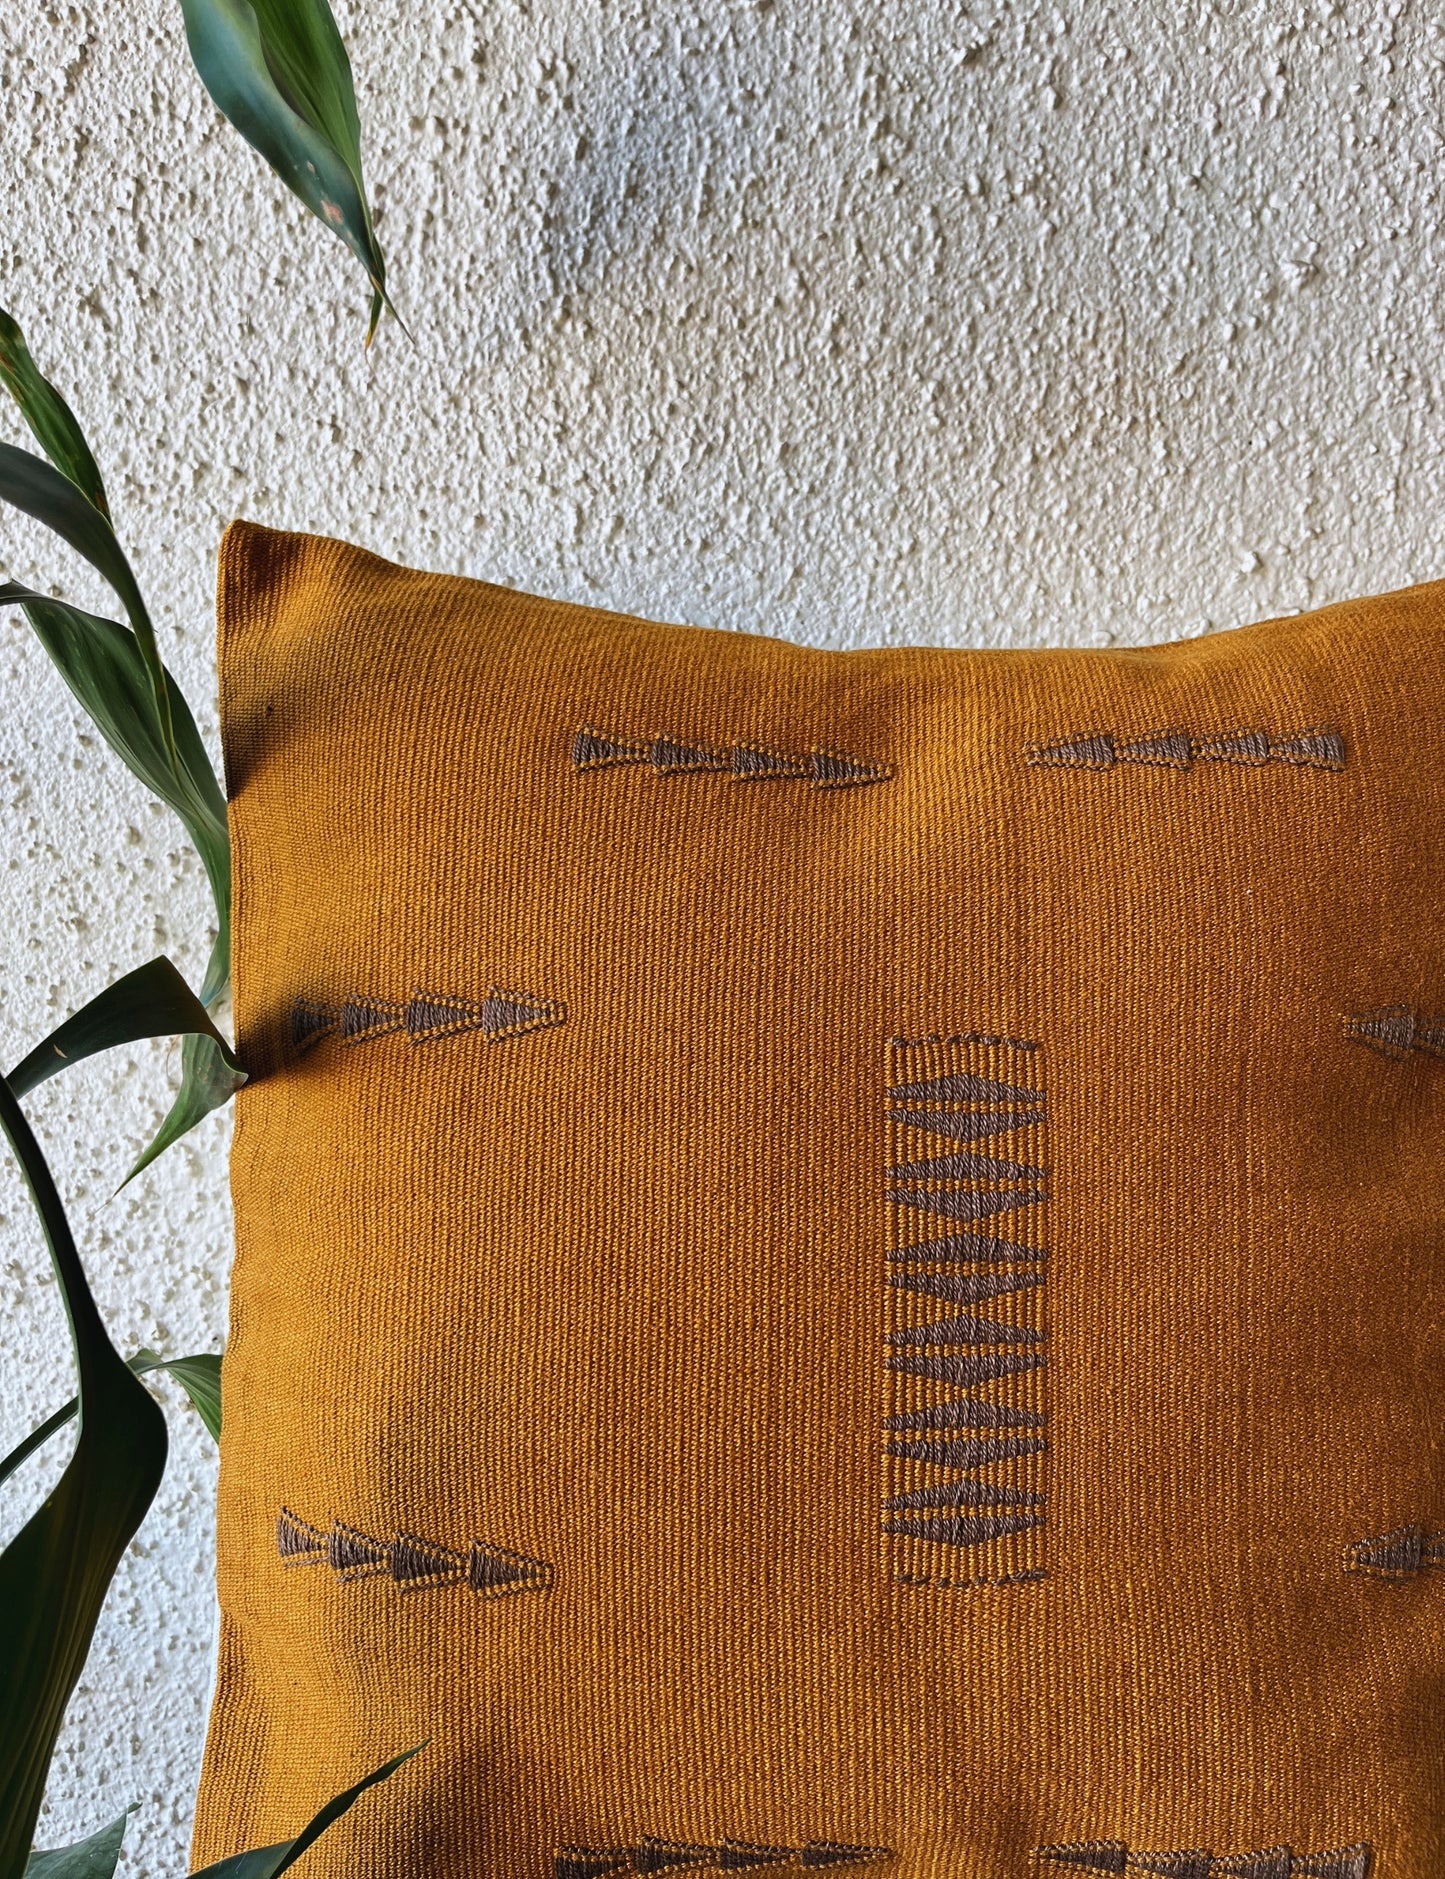 Chizami Weaves - Loin Loom Handwoven Cushion Cover Set in Golden Mustard (Set of 4)